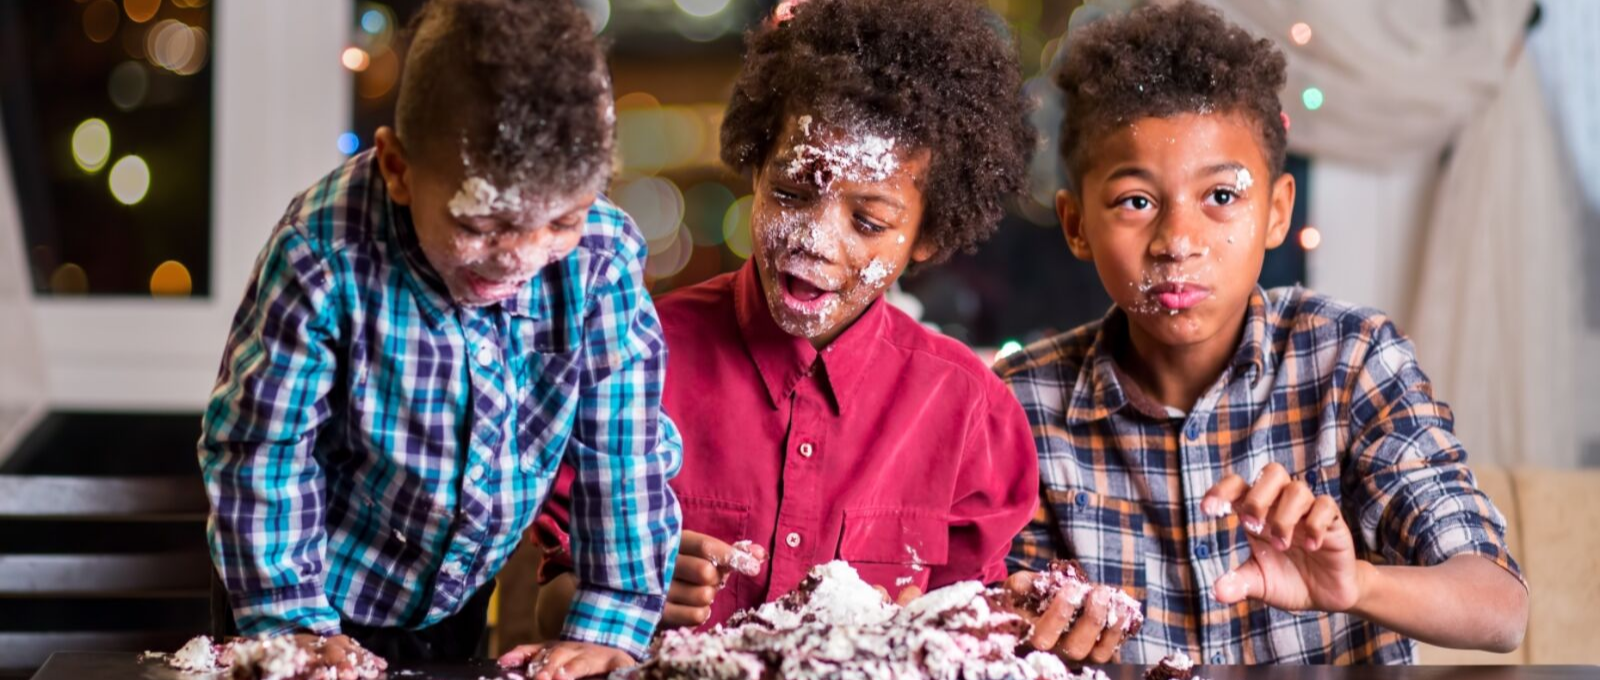 Three kids eating cake at the dining room table with crumbs all over their faces